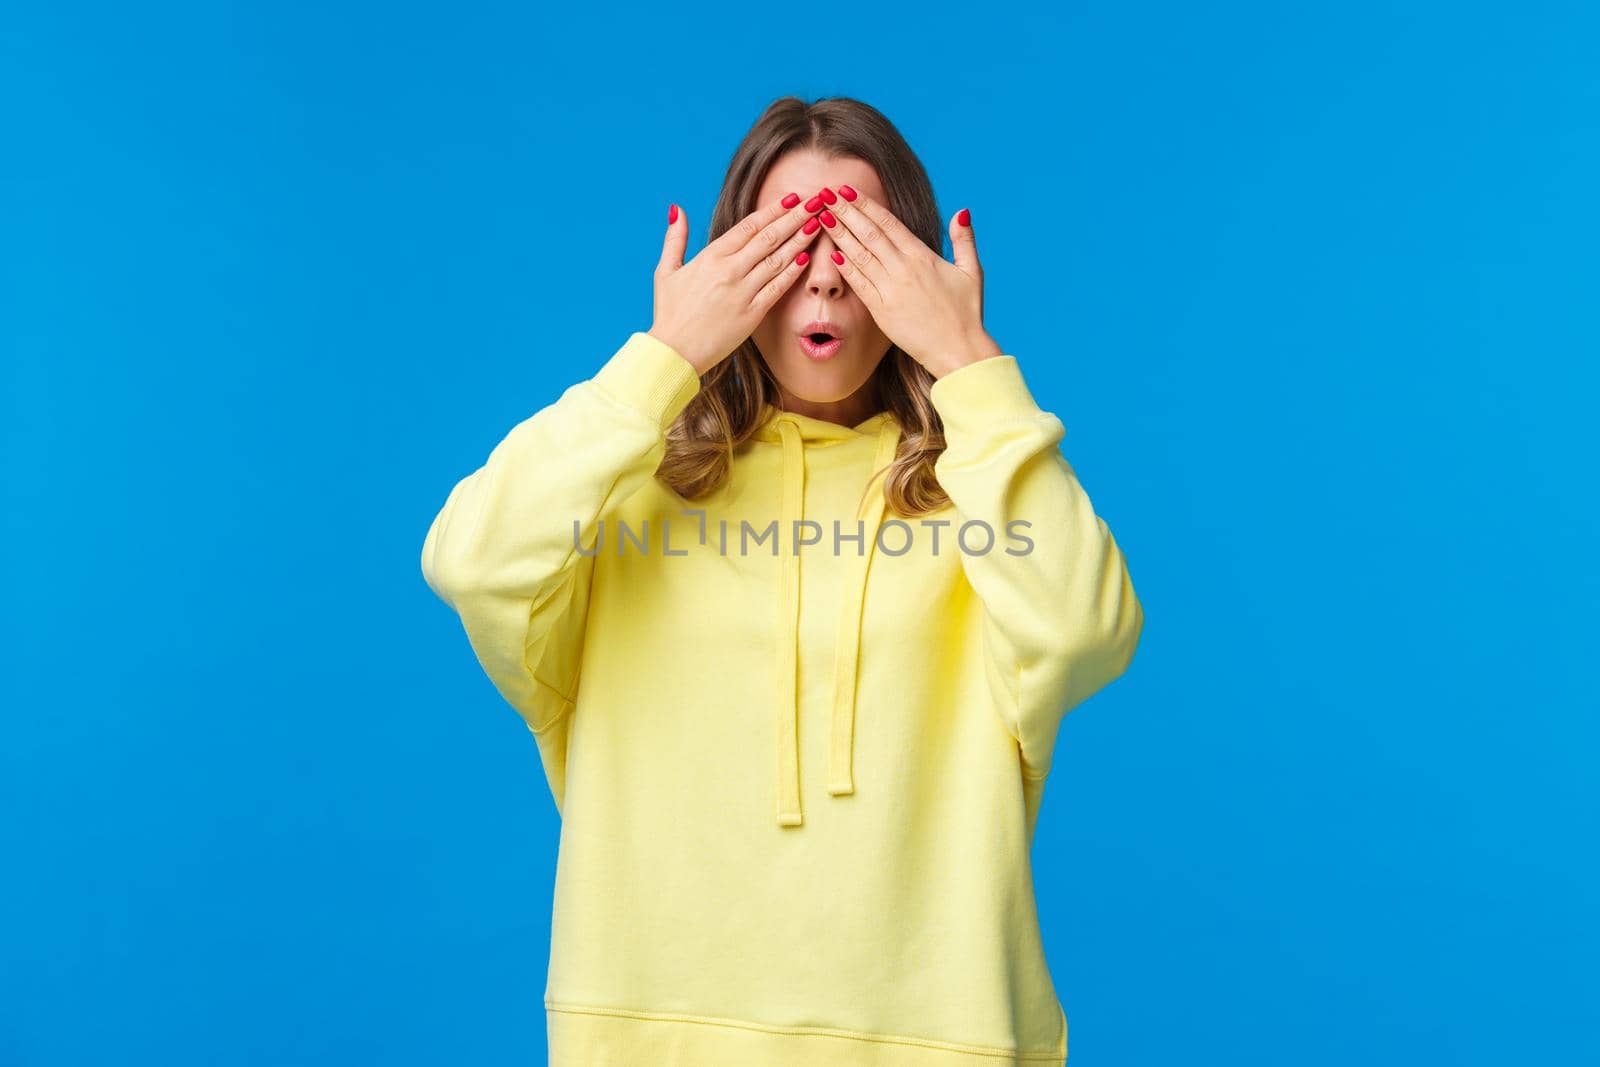 Girl fool around in playful mood, close eyes with hands count to ten, playing hide n seek or peekaboo, waiting for surprise gift, express curiosity and interest, stand blue background awaiting.